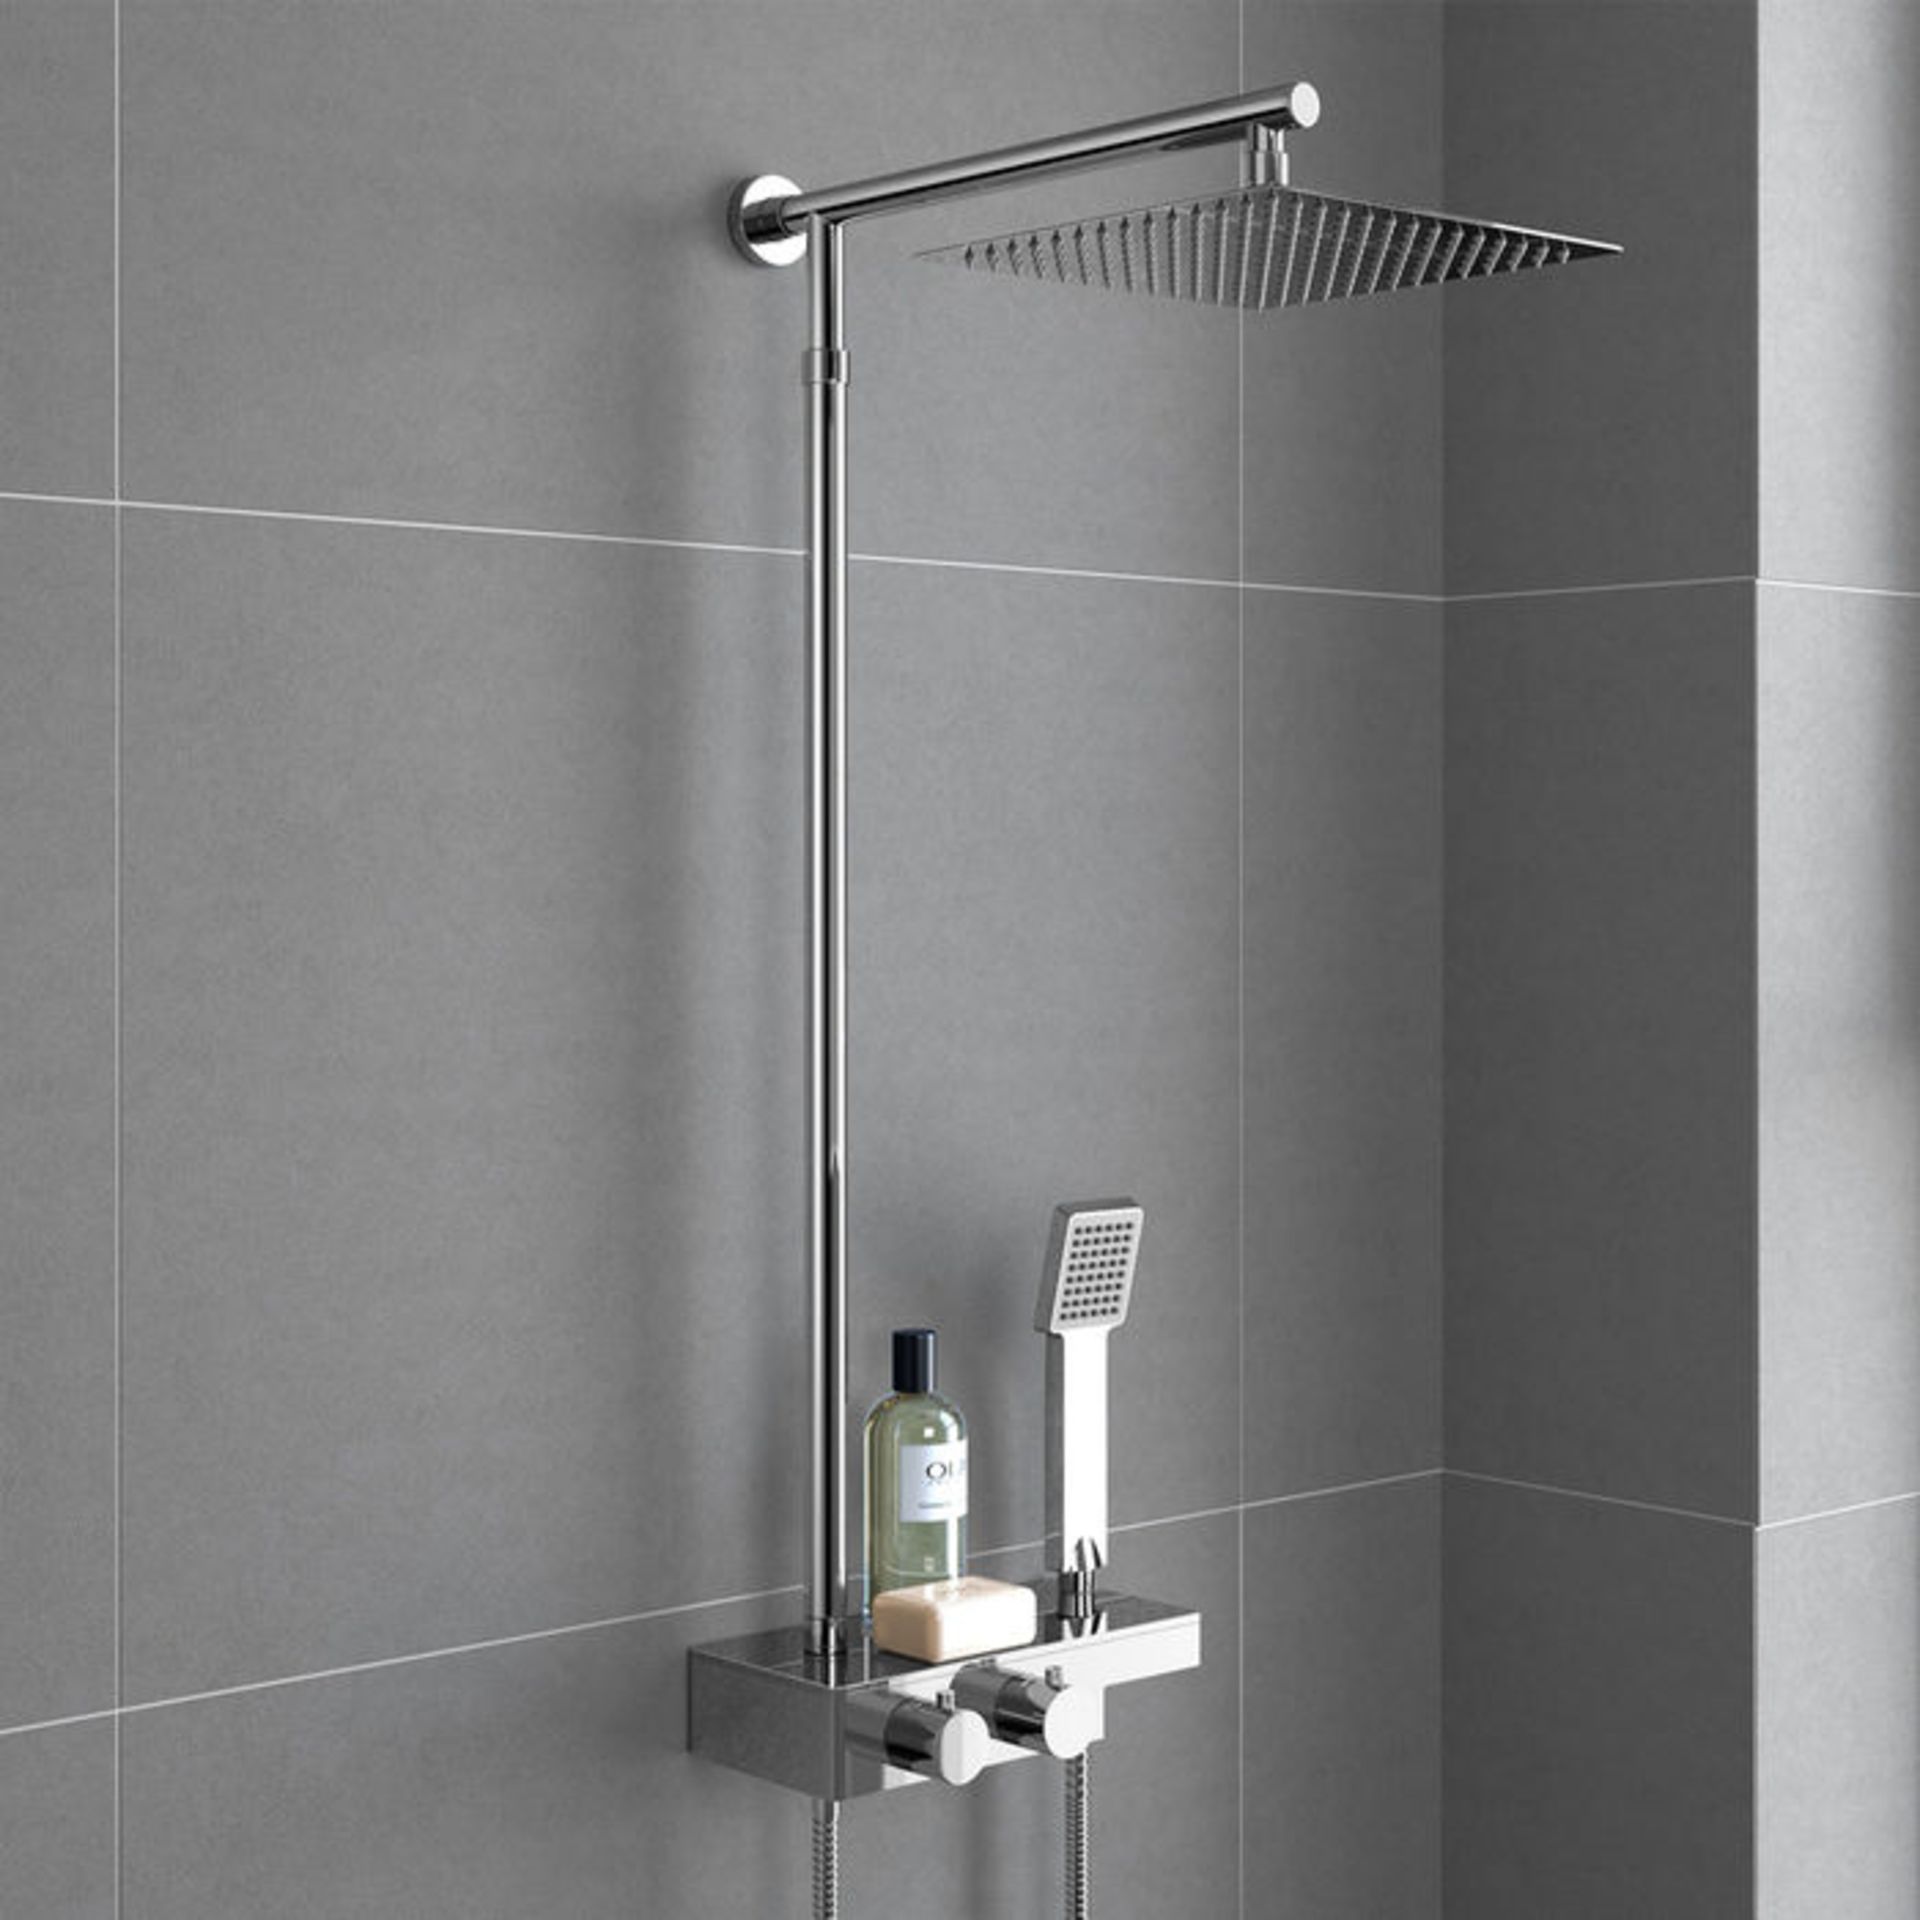 (KL39) Square Exposed Thermostatic Shower Shelf, Kit & Large Head. Style meets function with our - Image 3 of 4